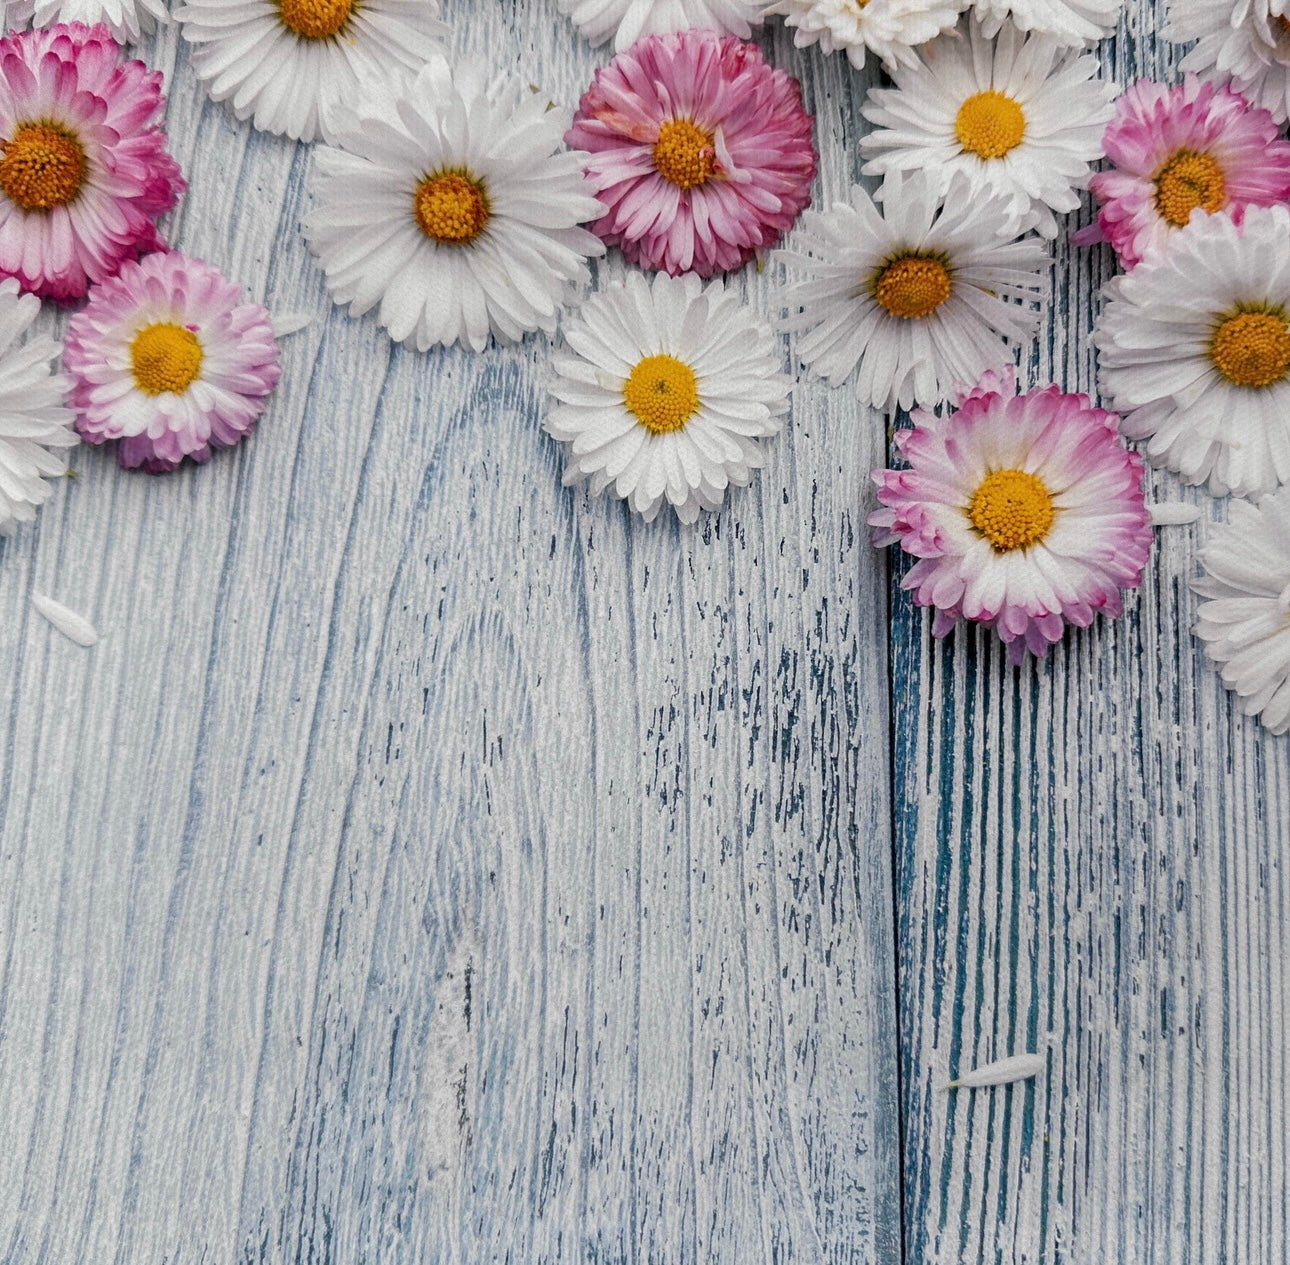 Pink & White Daisies Wooden Canvas Photography Background